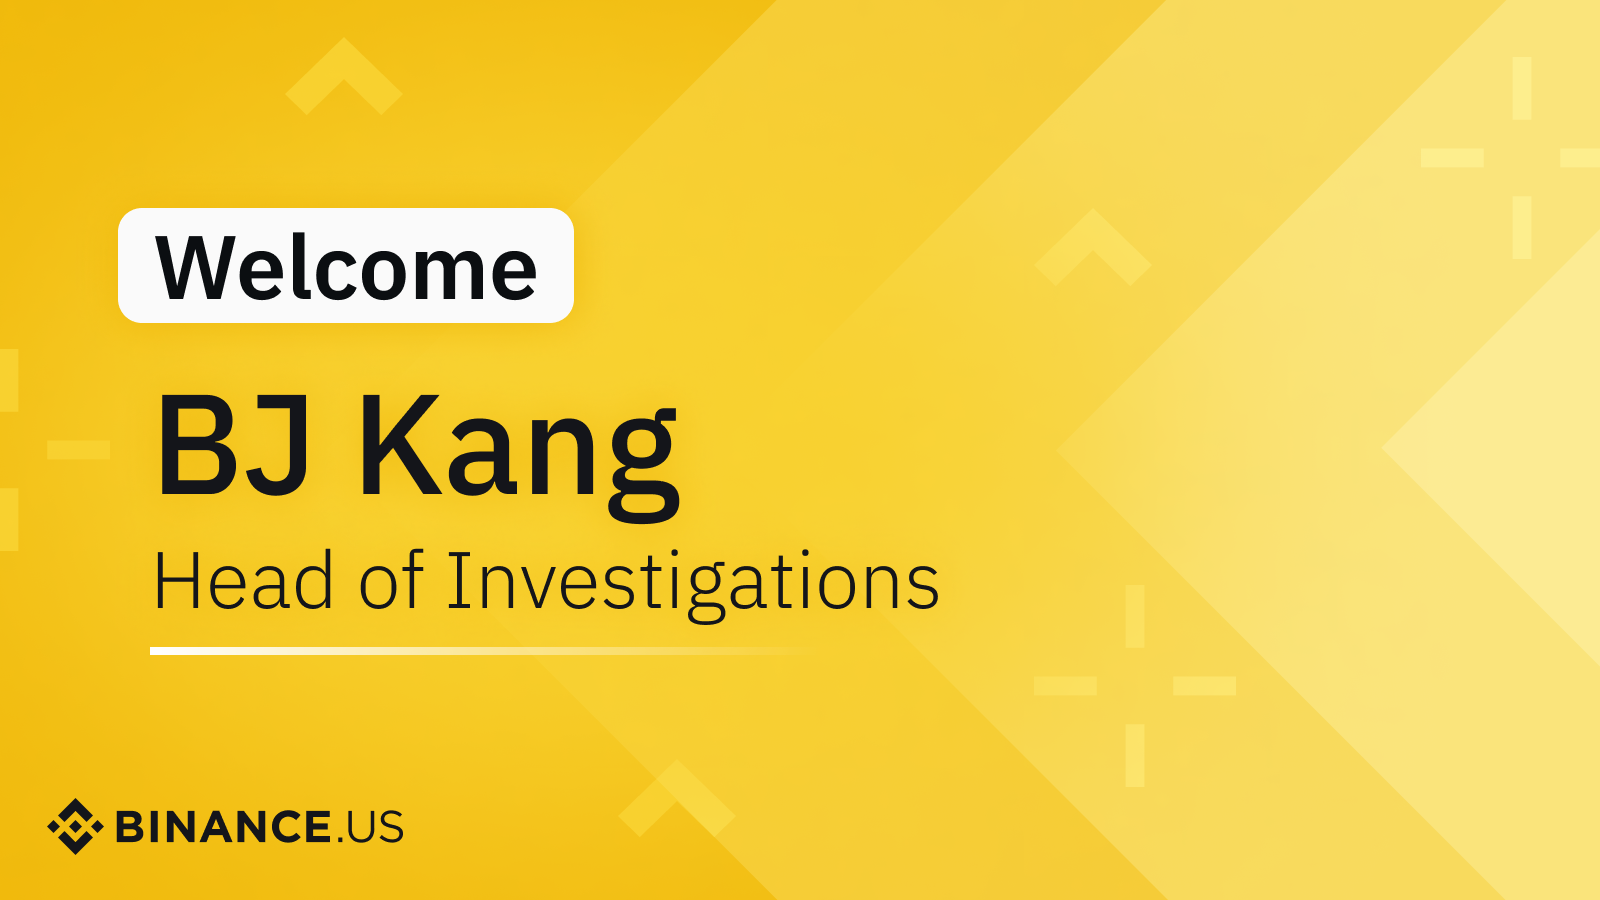 Decorated Former FBI Agent, BJ Kang, Joins Binance.US as Head of Investigations